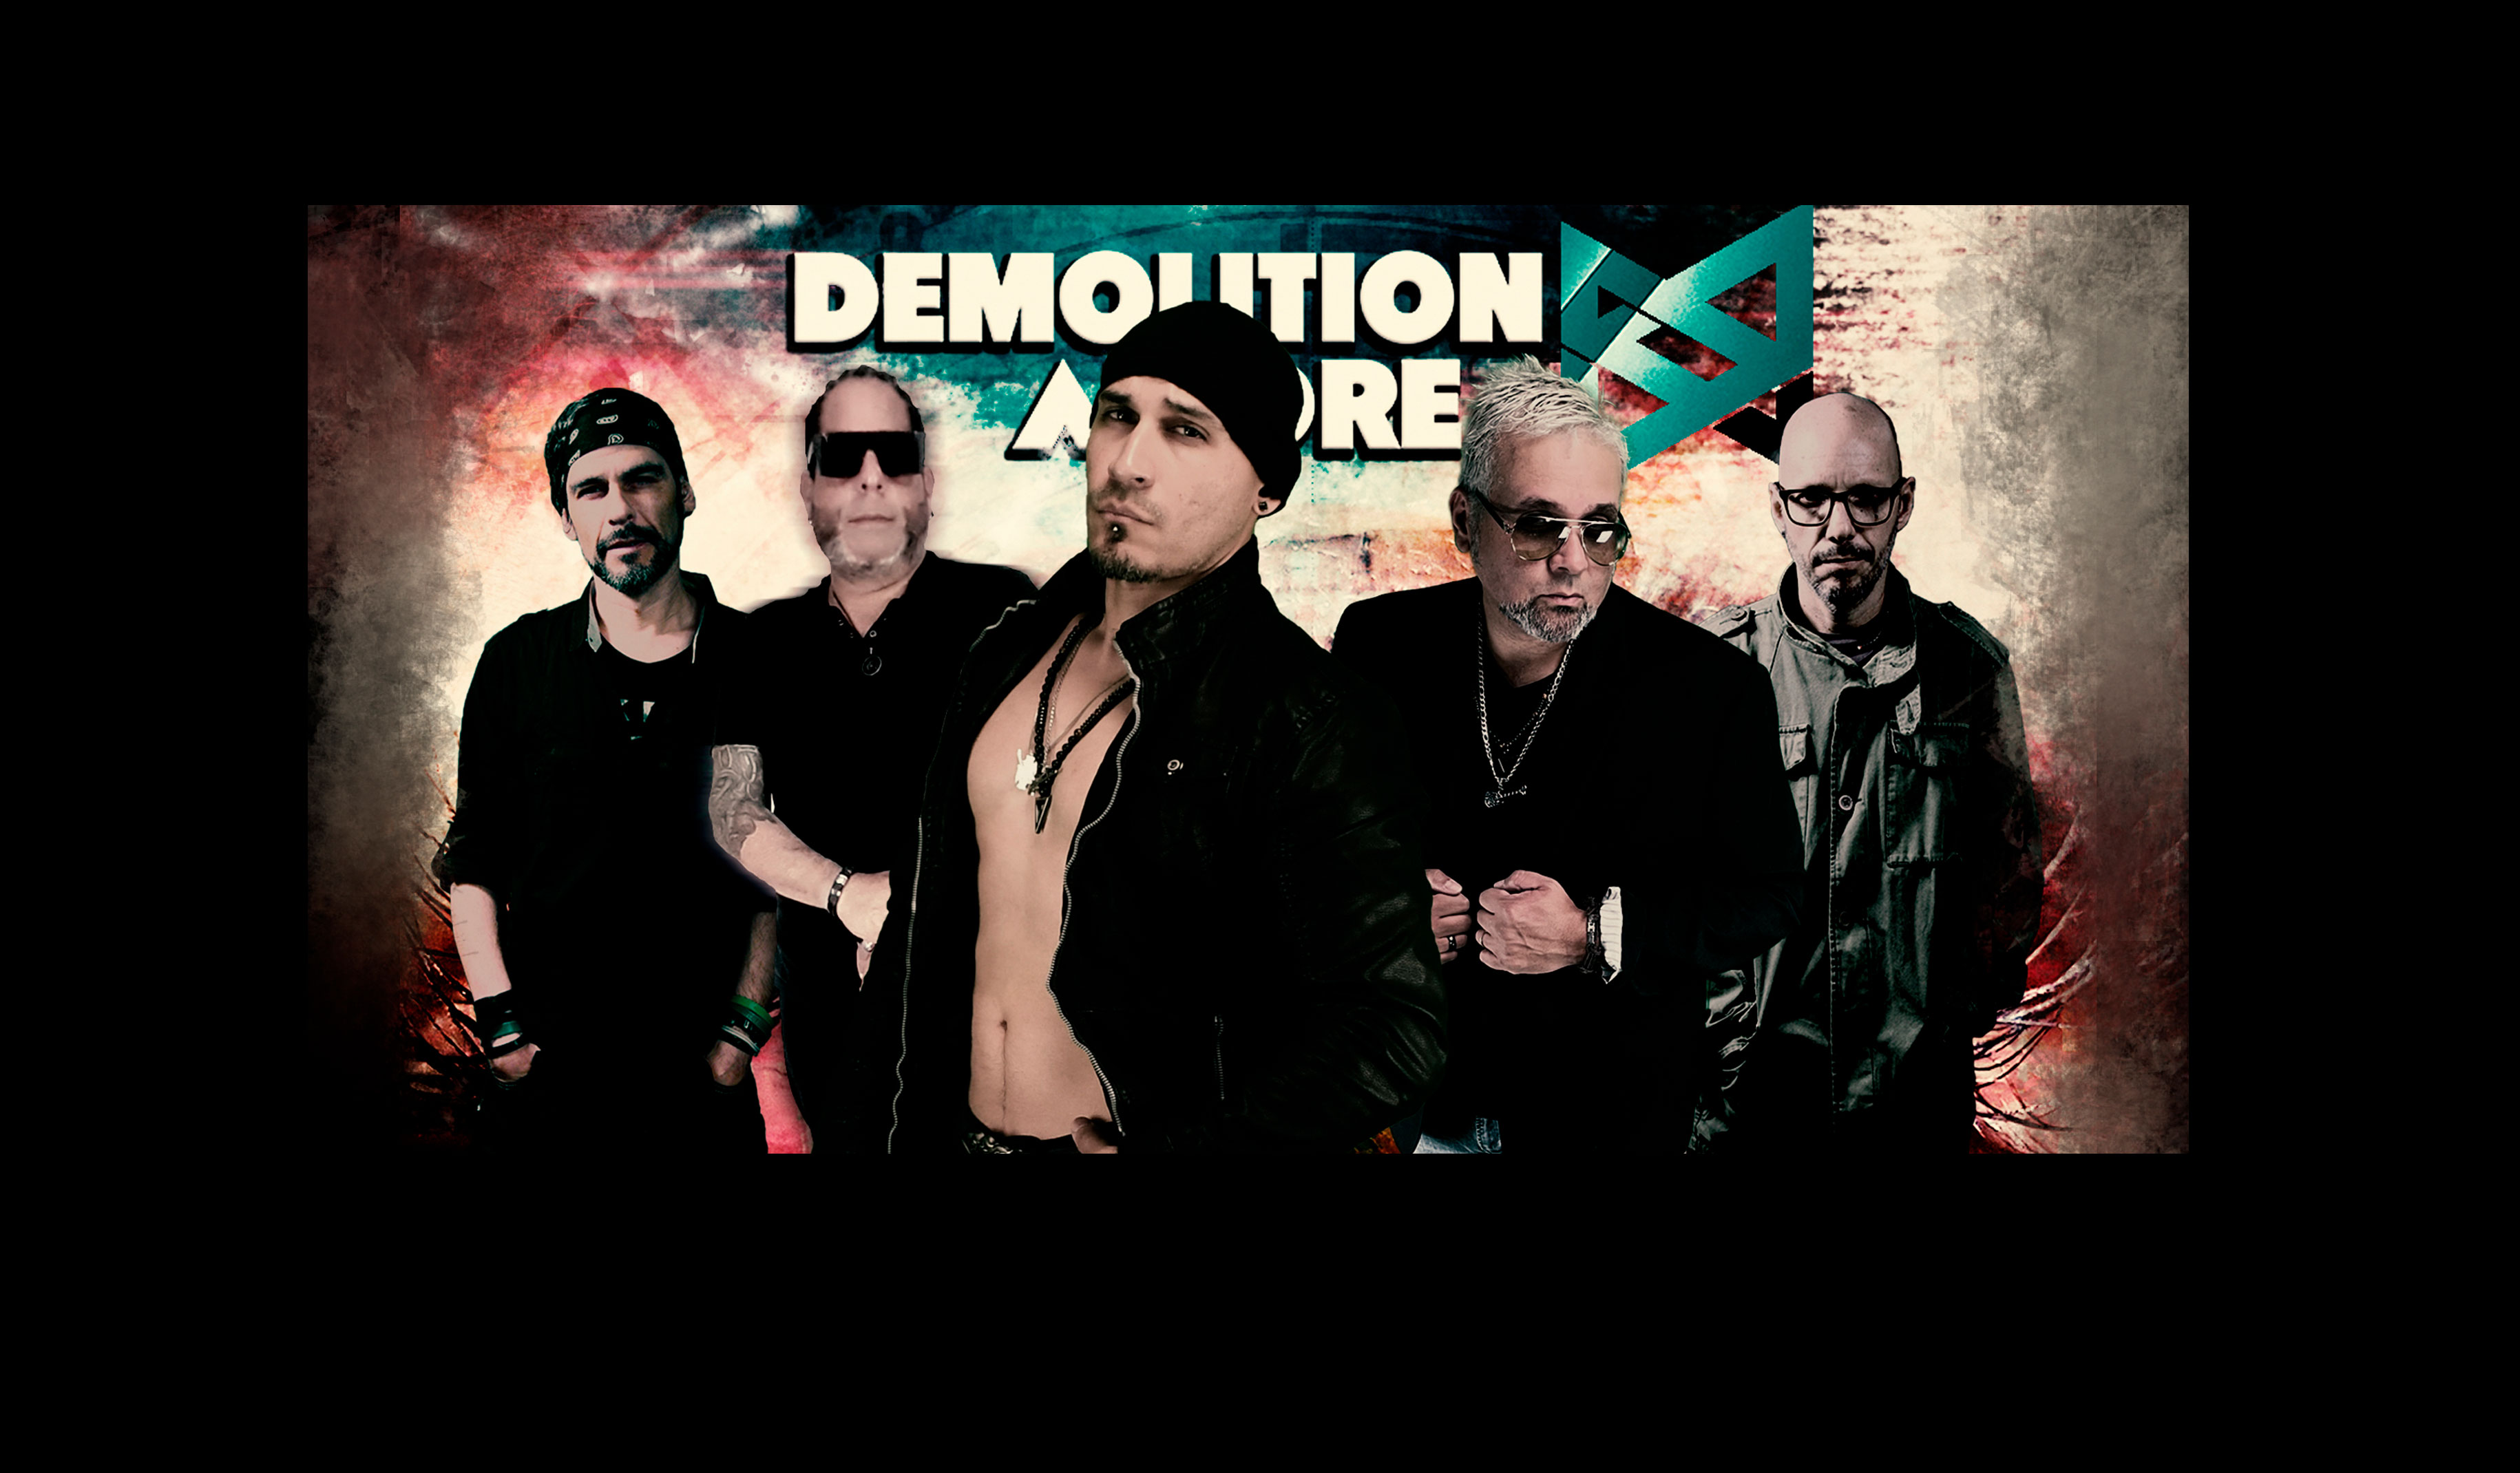 Demolition Amore: The New Name of Ultimate Hard Rock and Alternative Music